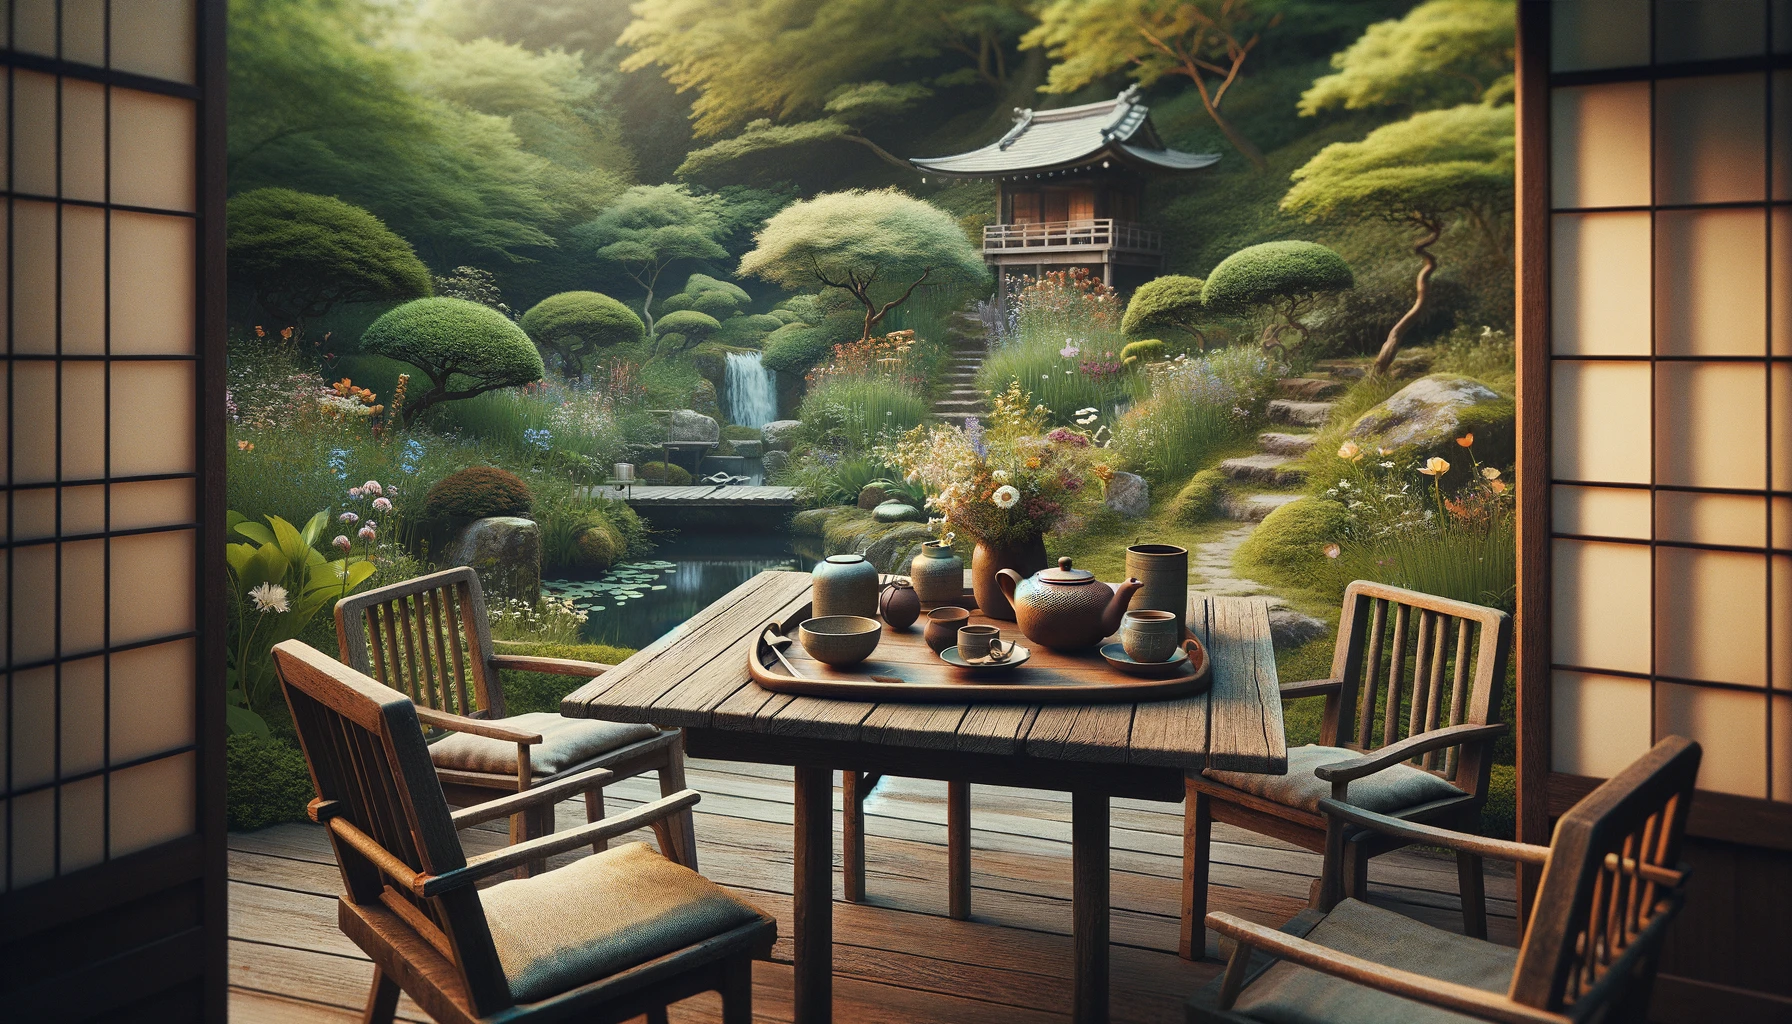 a tech-free tea time setting in an outdoor garden. The scene is tranquil and serene, emphasizing a return to nature